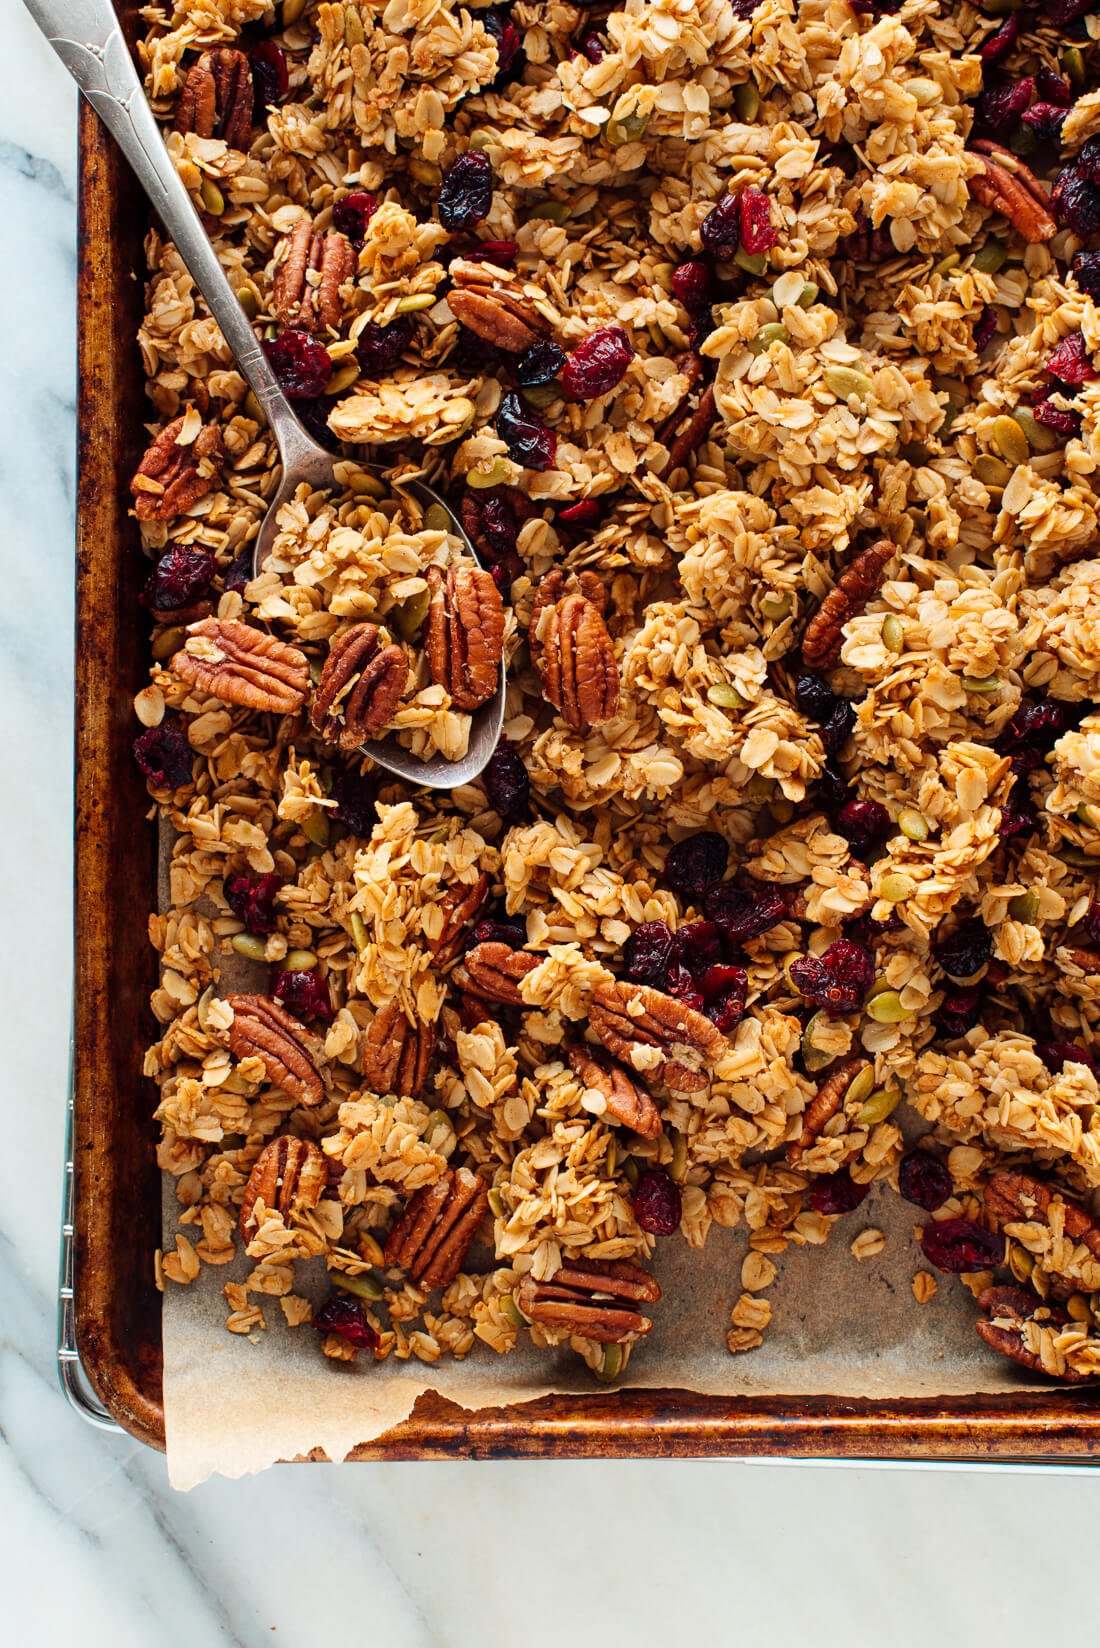 Global Granola Market Is Estimated To Witness High Growth Owing To Growing Health-conscious Population